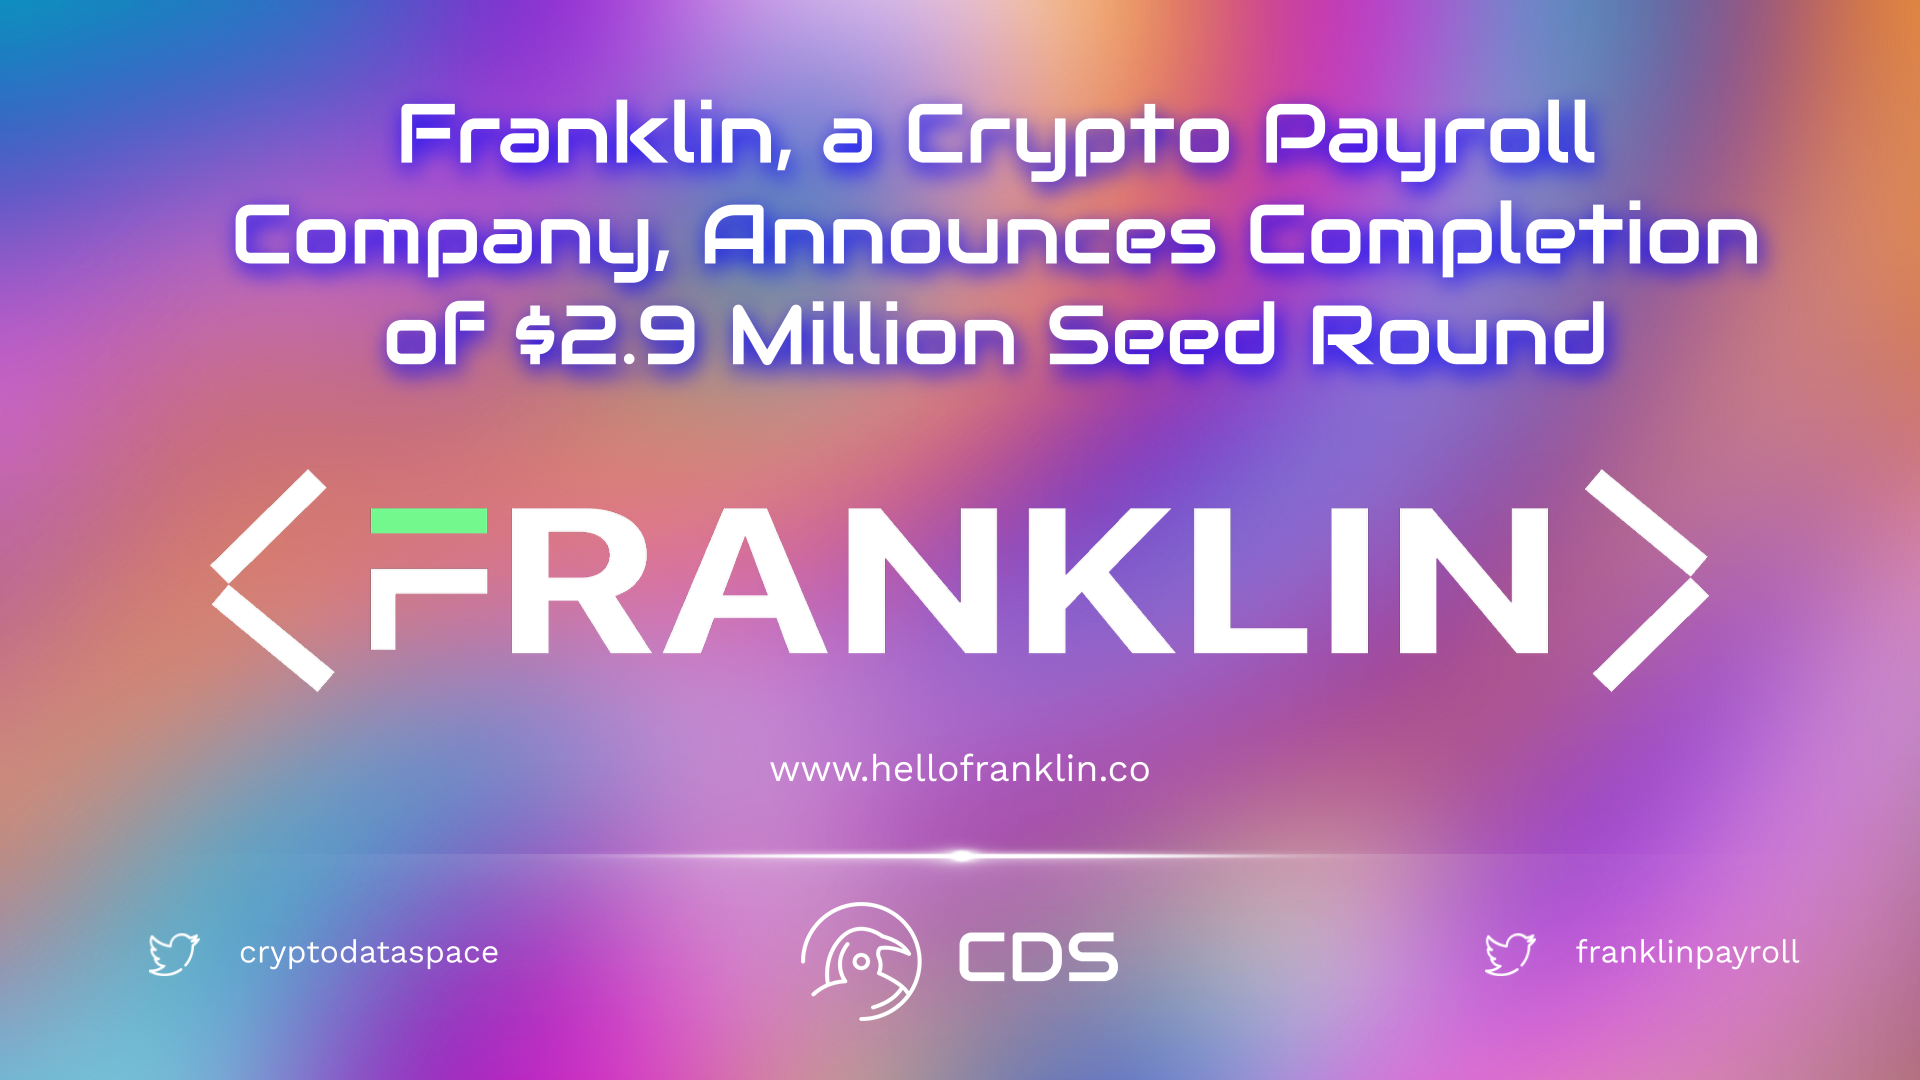 Franklin, a Crypto Payroll Company, Announces Completion of $2.9 Million Seed Round